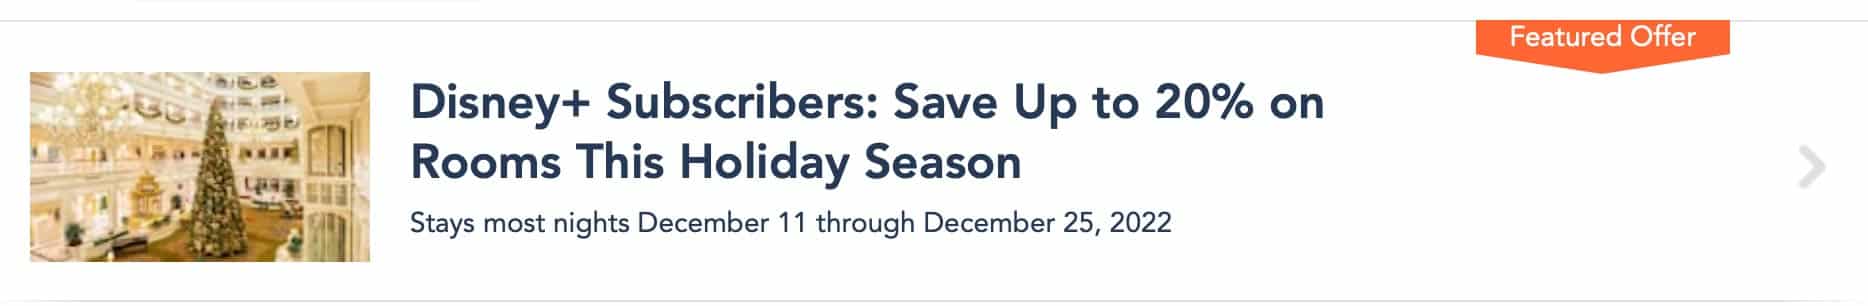 Save Up to 20% Graphic - Disney Plus Day Discount - WDW Resorts